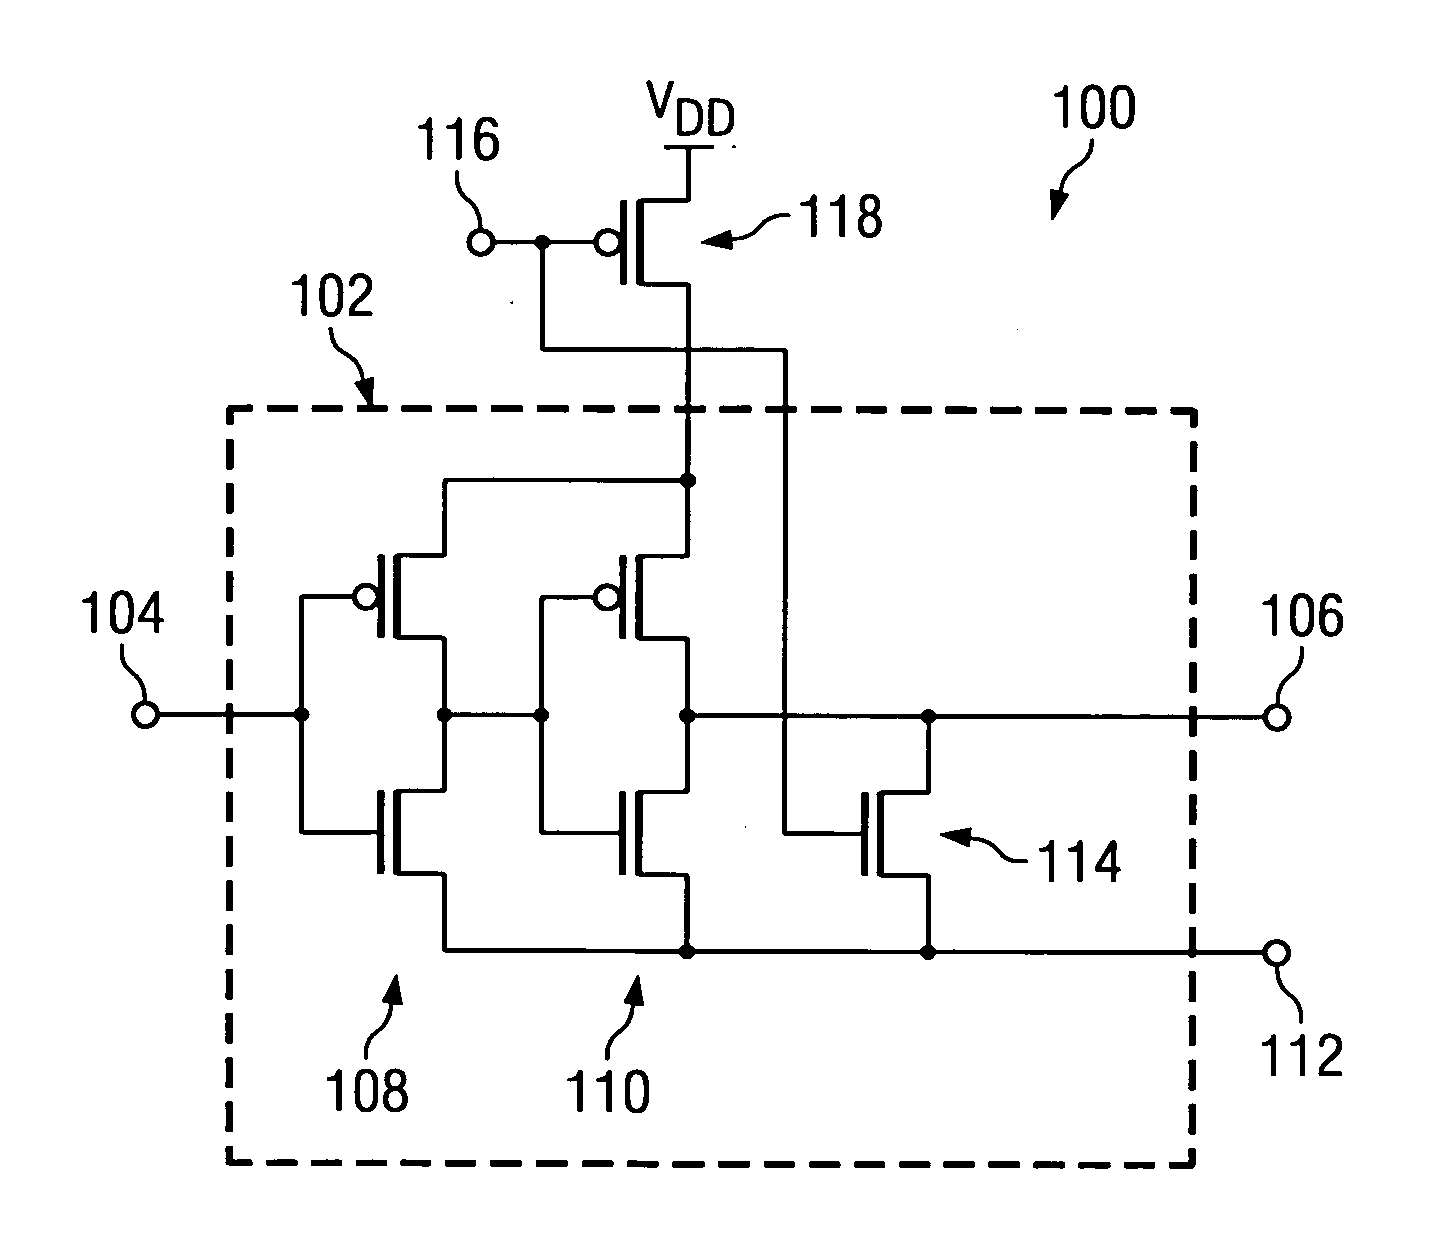 System for reducing row periphery power consumption in memory devices